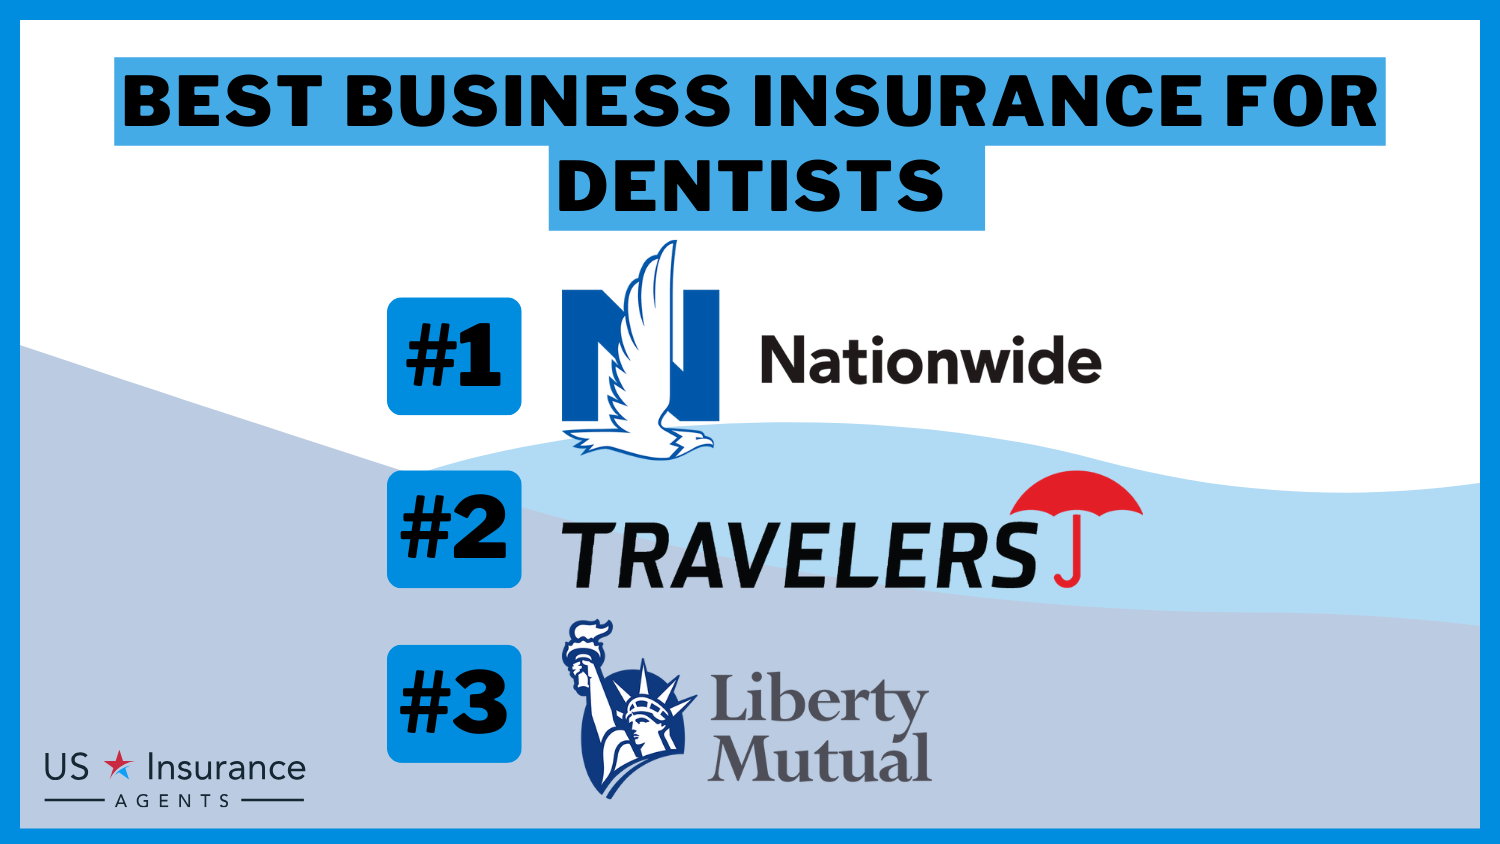 Nationwide, Travelers, Liberty Mutual: Best Business Insurance for Dentists